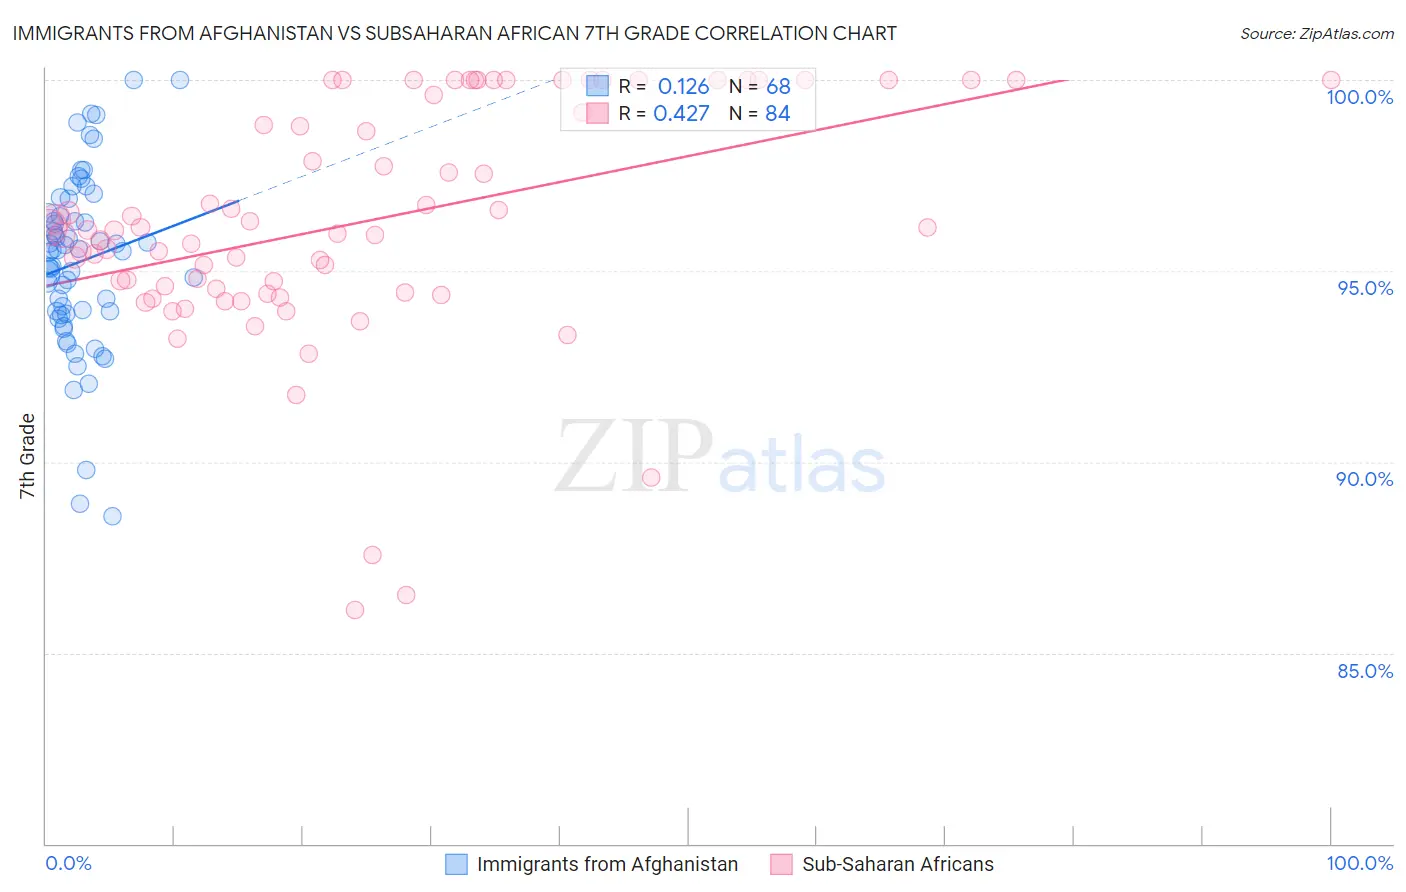 Immigrants from Afghanistan vs Subsaharan African 7th Grade